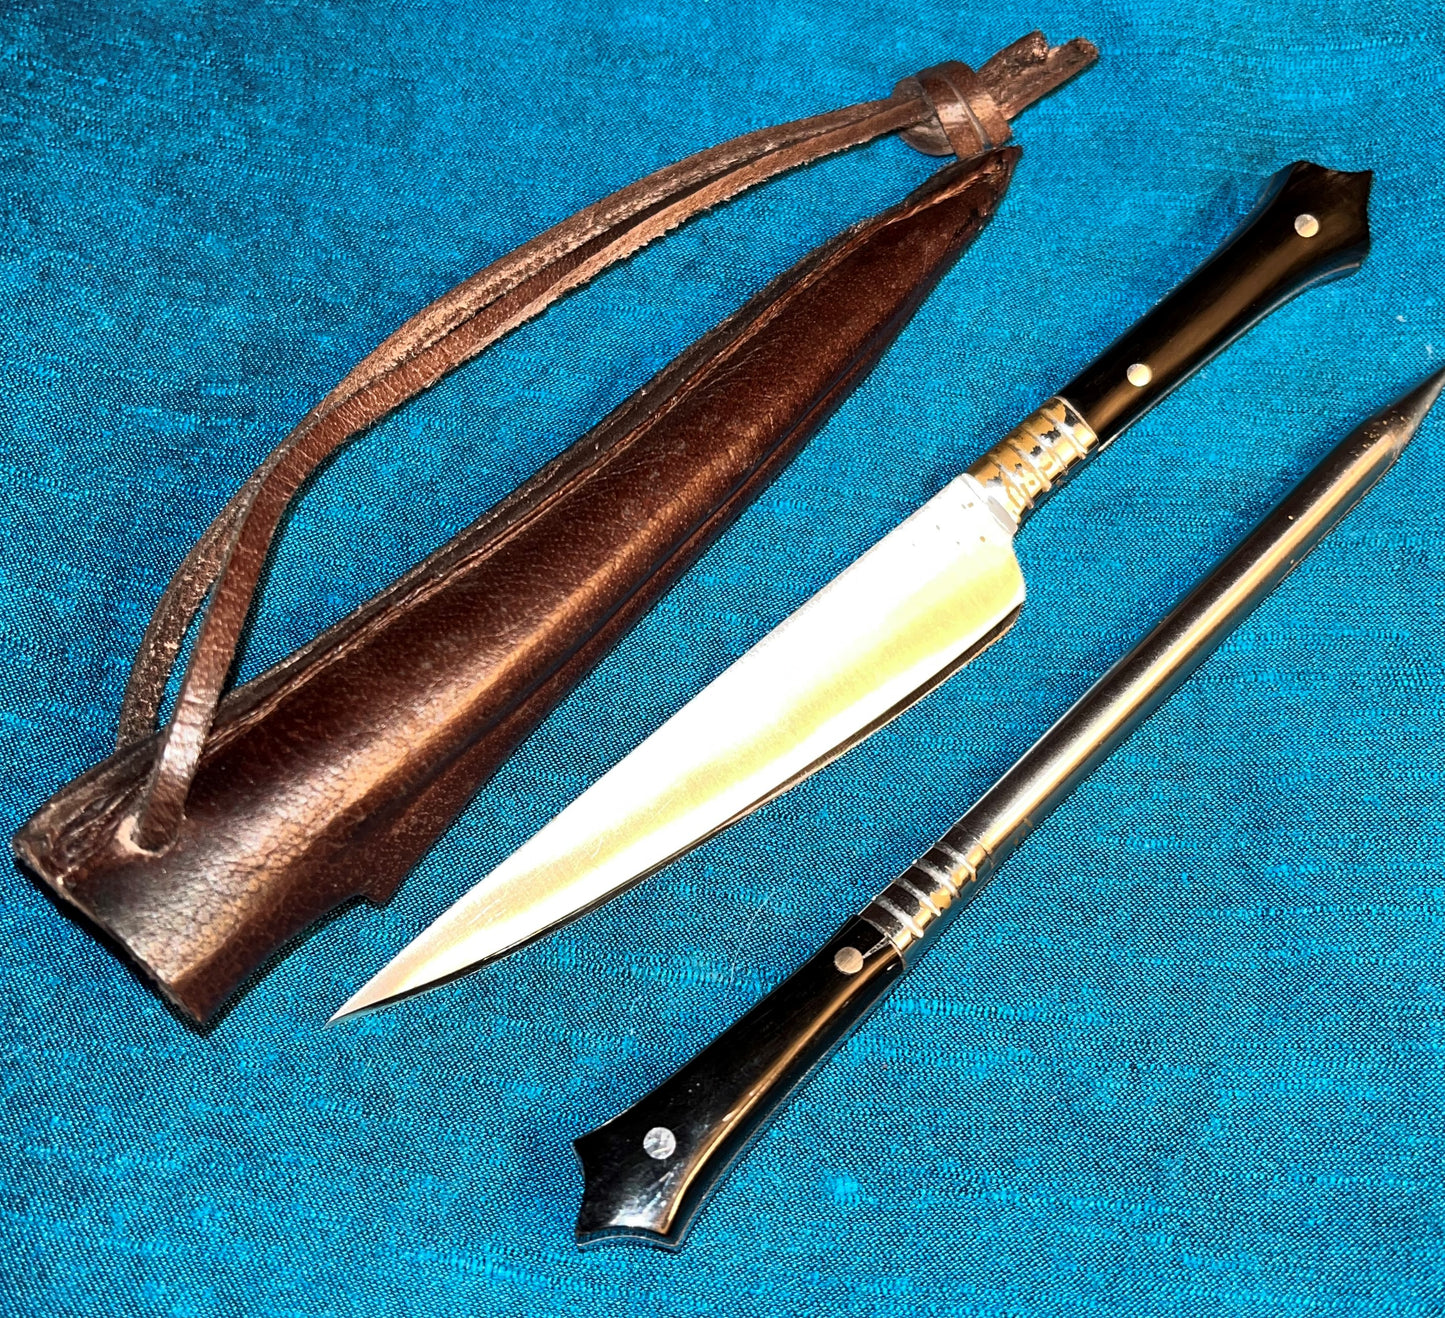 2-piece Medieval Cutlery in a Sheath - Knife and Pricker, bone, horn, wood handle